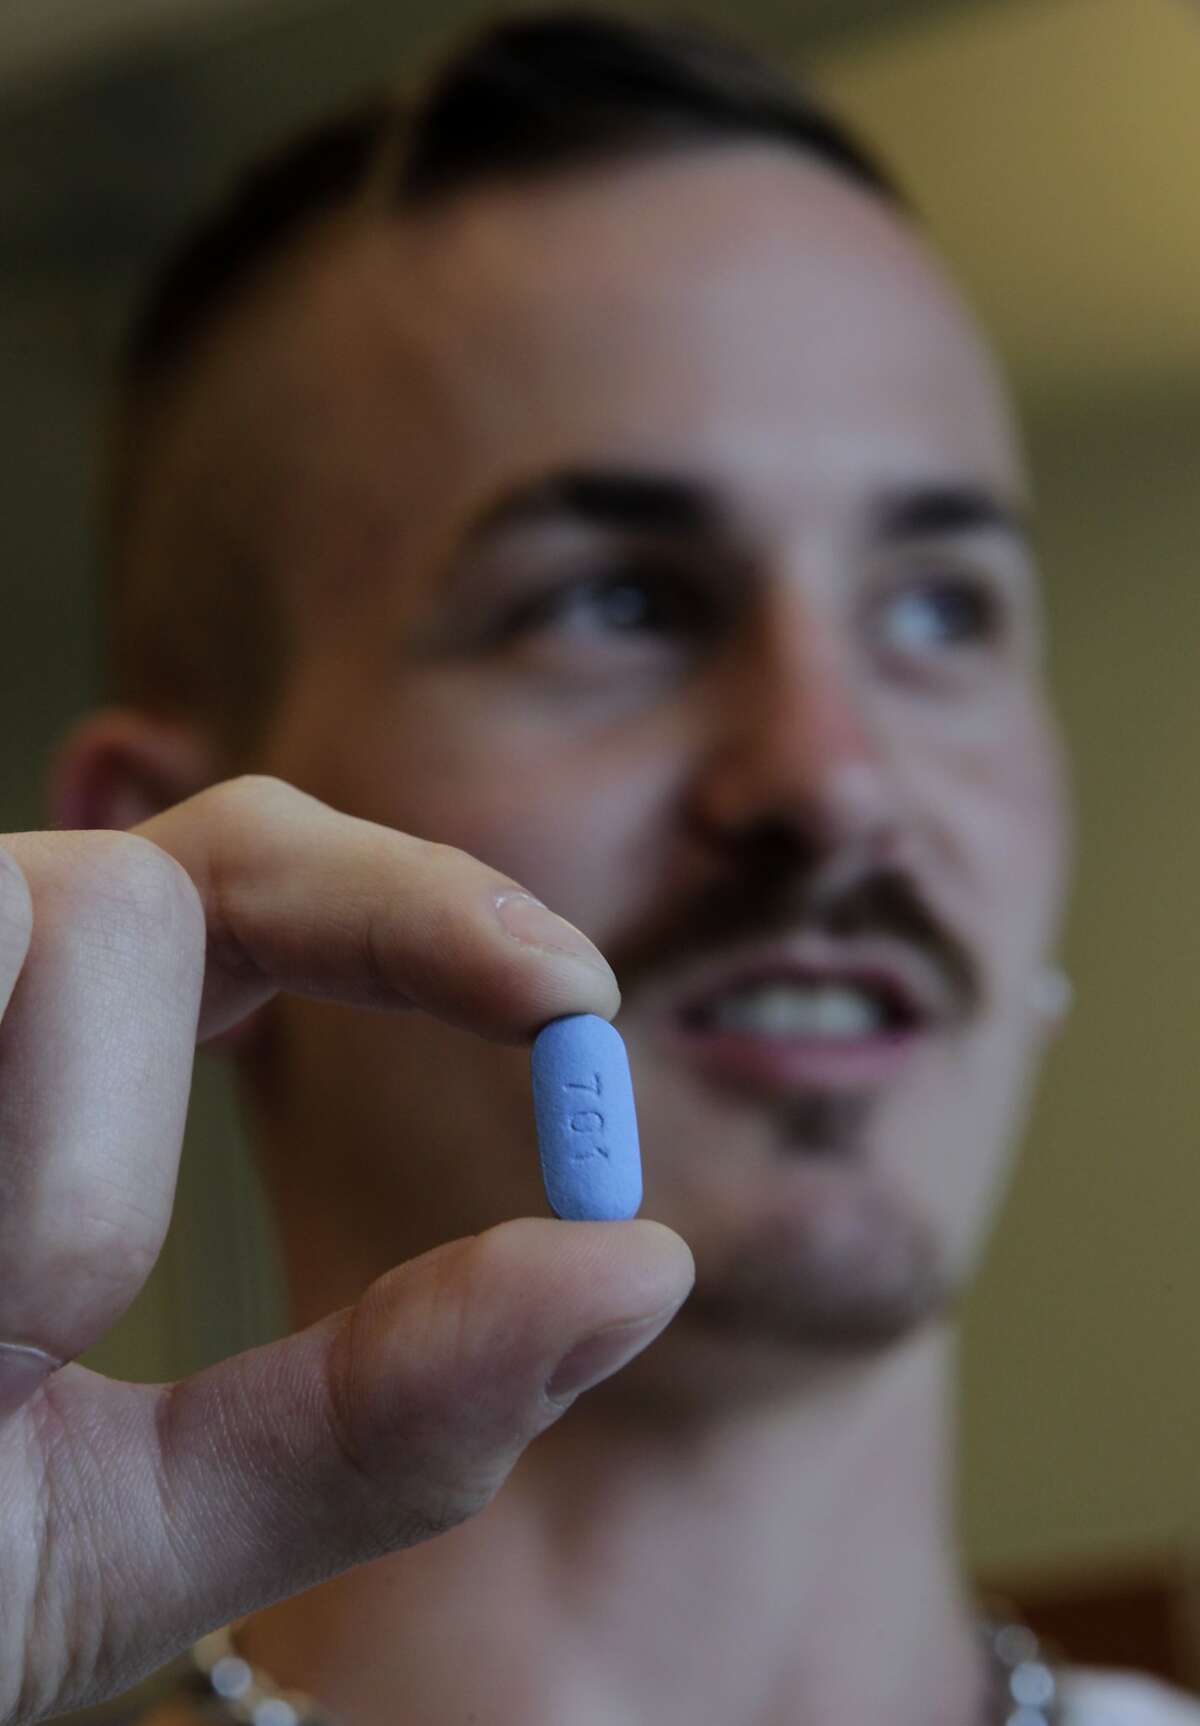 Adam Zeboski, an HIV counselor for the SF AIDS Foundation, holds a dose of Truvada in San Francisco, Calif. on Friday, May 30, 2014. Zeboski has long supported the efficacy of the drug Truvada to prevent HIV infection and the CDC has finally endorsed its mainstream use.